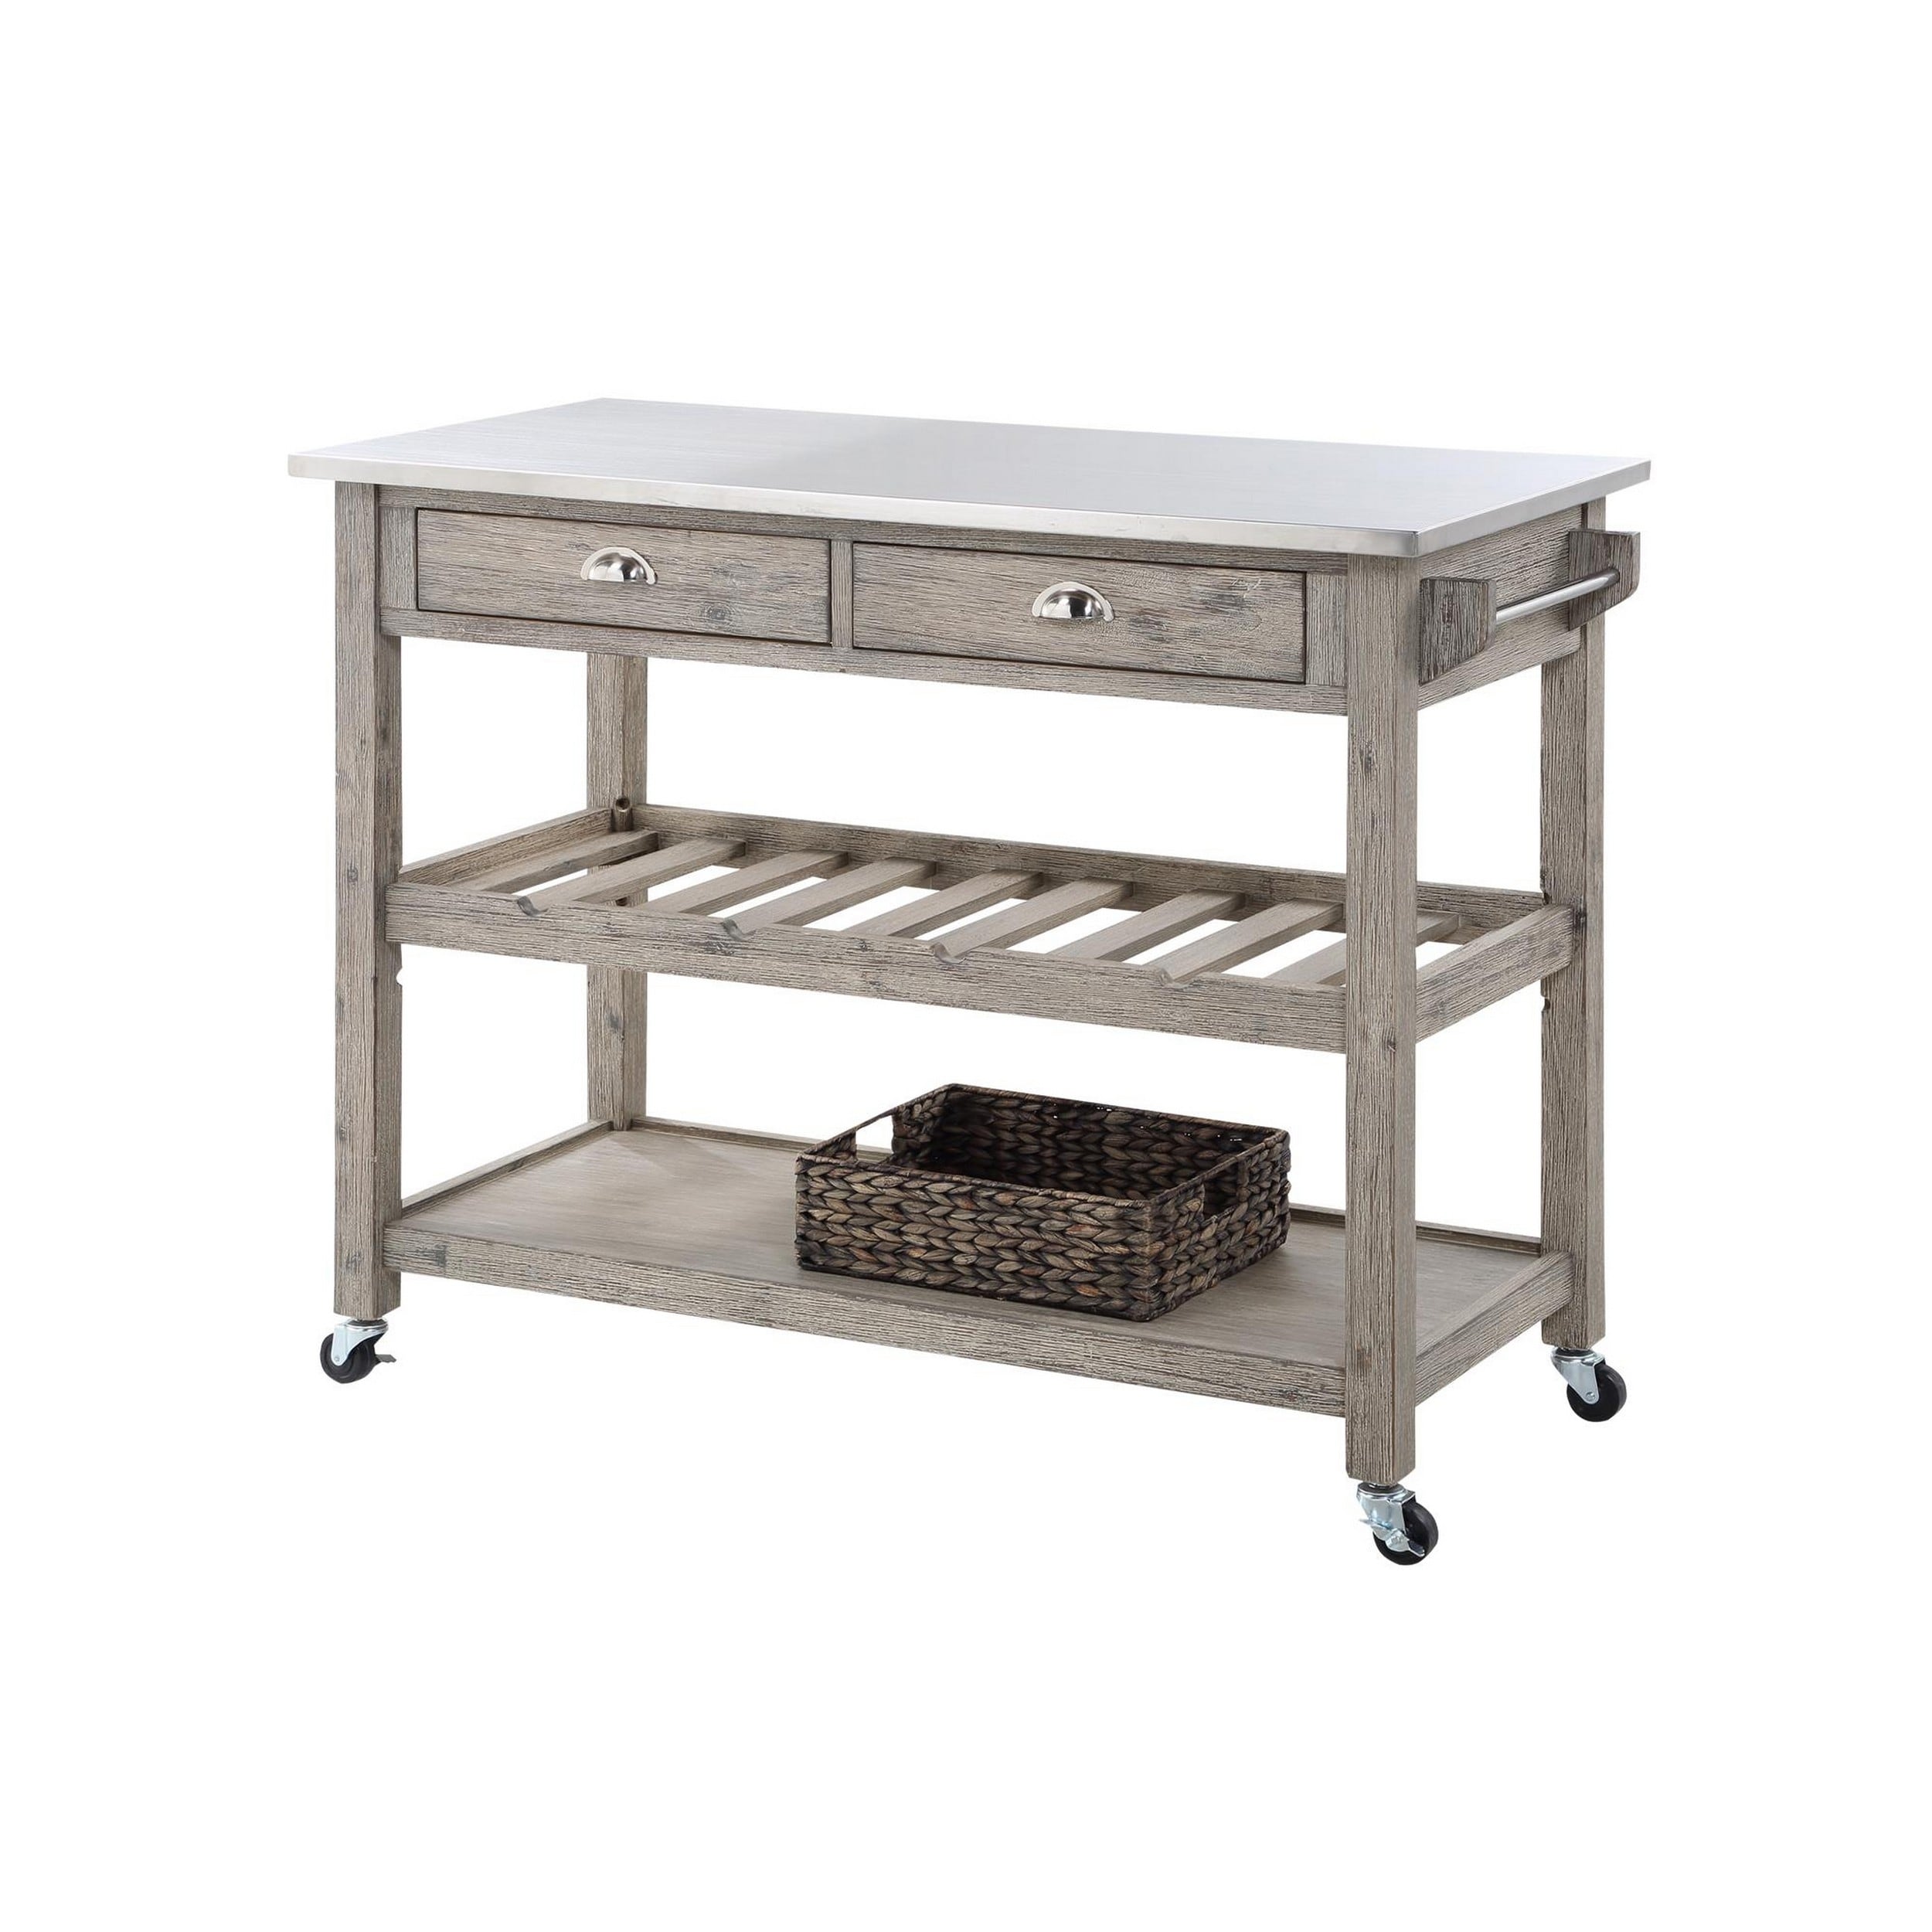 Kit 44 Inch Rolling Kitchen Island Bar Cart,Stainless Steel Top,Gray,Chrome